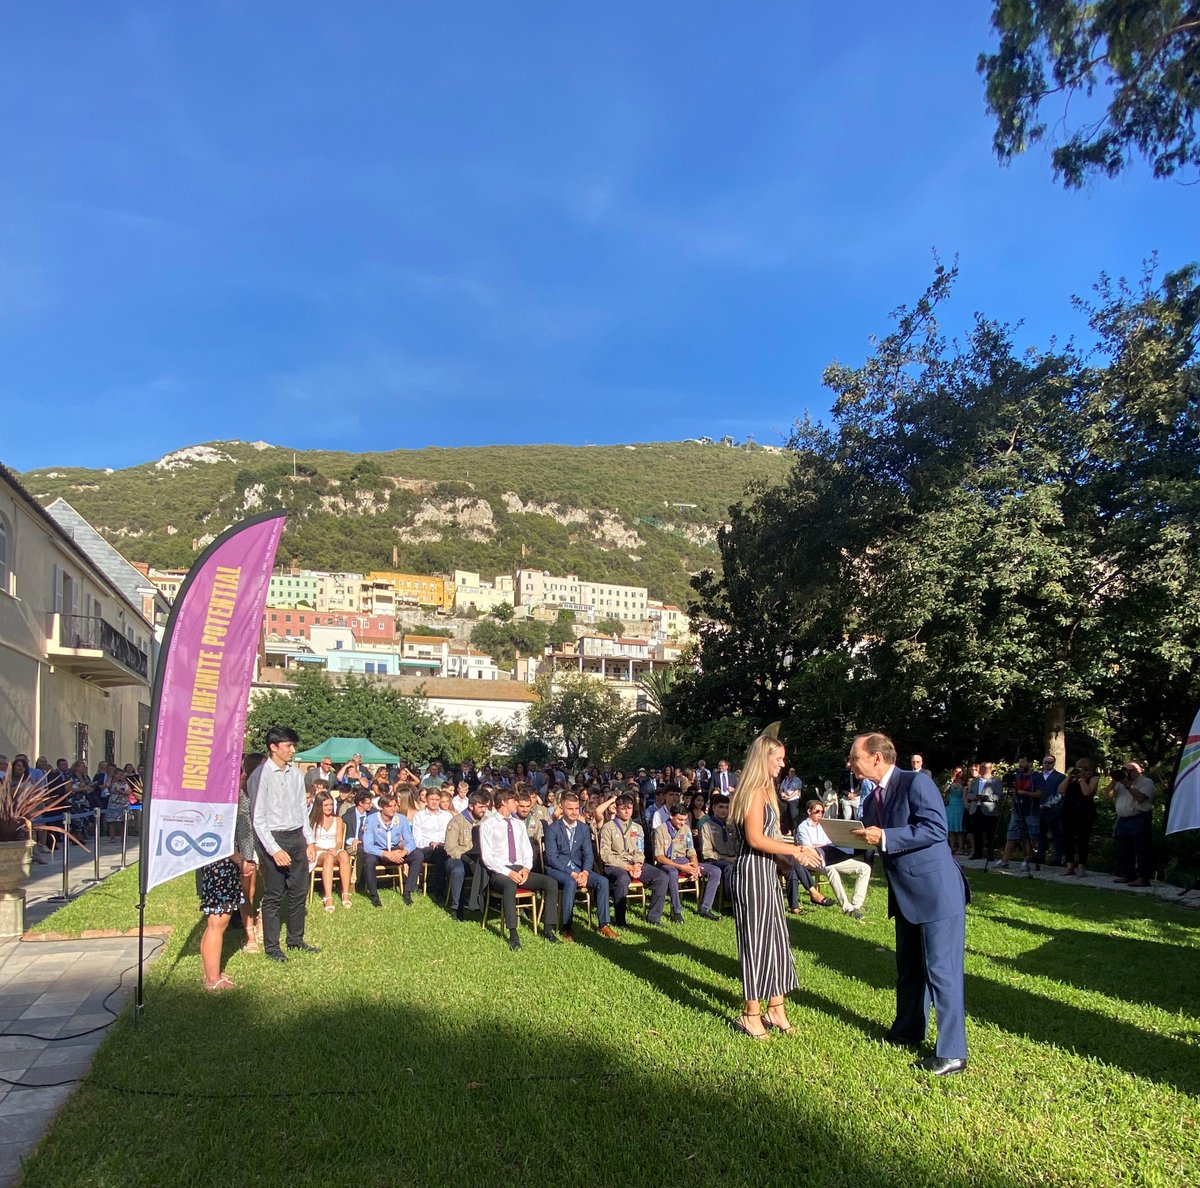 More from the Award Ceremony @Convent_Gib #worldready